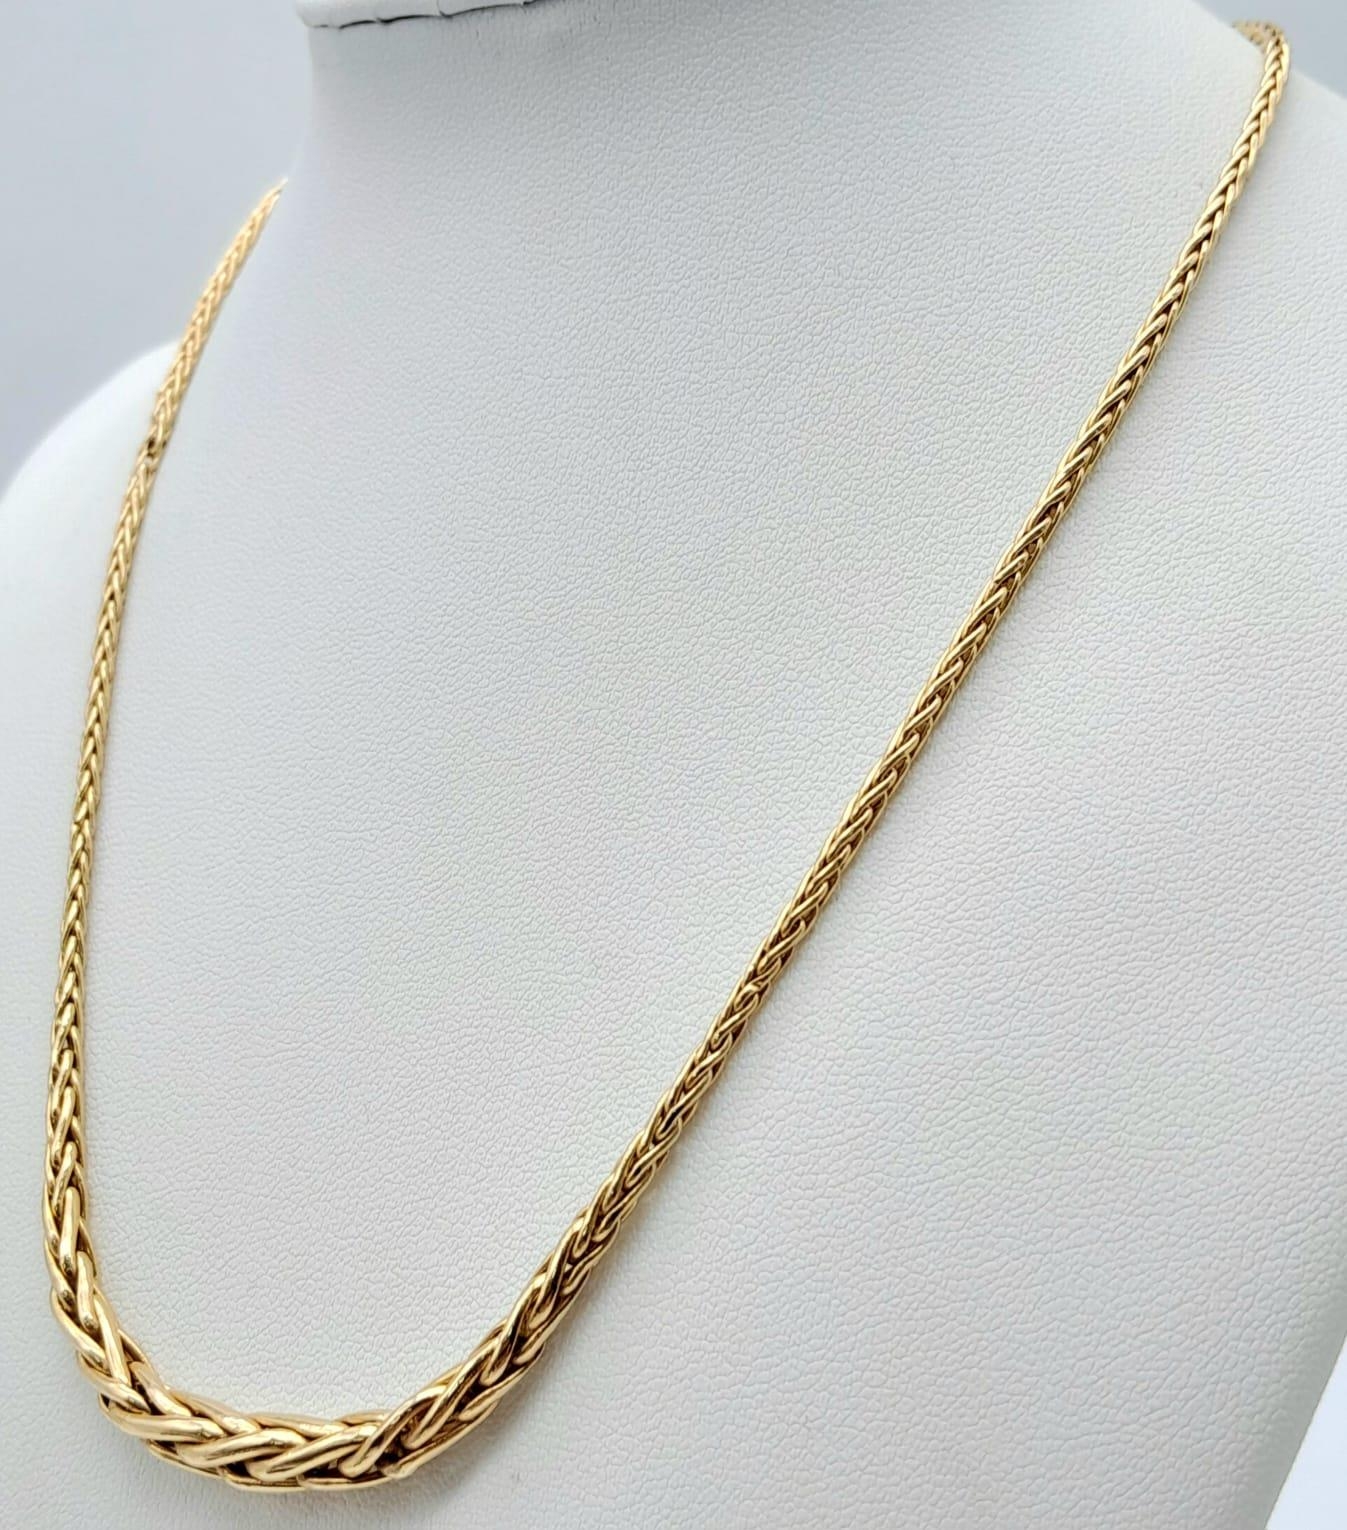 A Vintage 9K Yellow Gold Woven Link Necklace. 42cm length. 5.7g weight. - Image 2 of 6